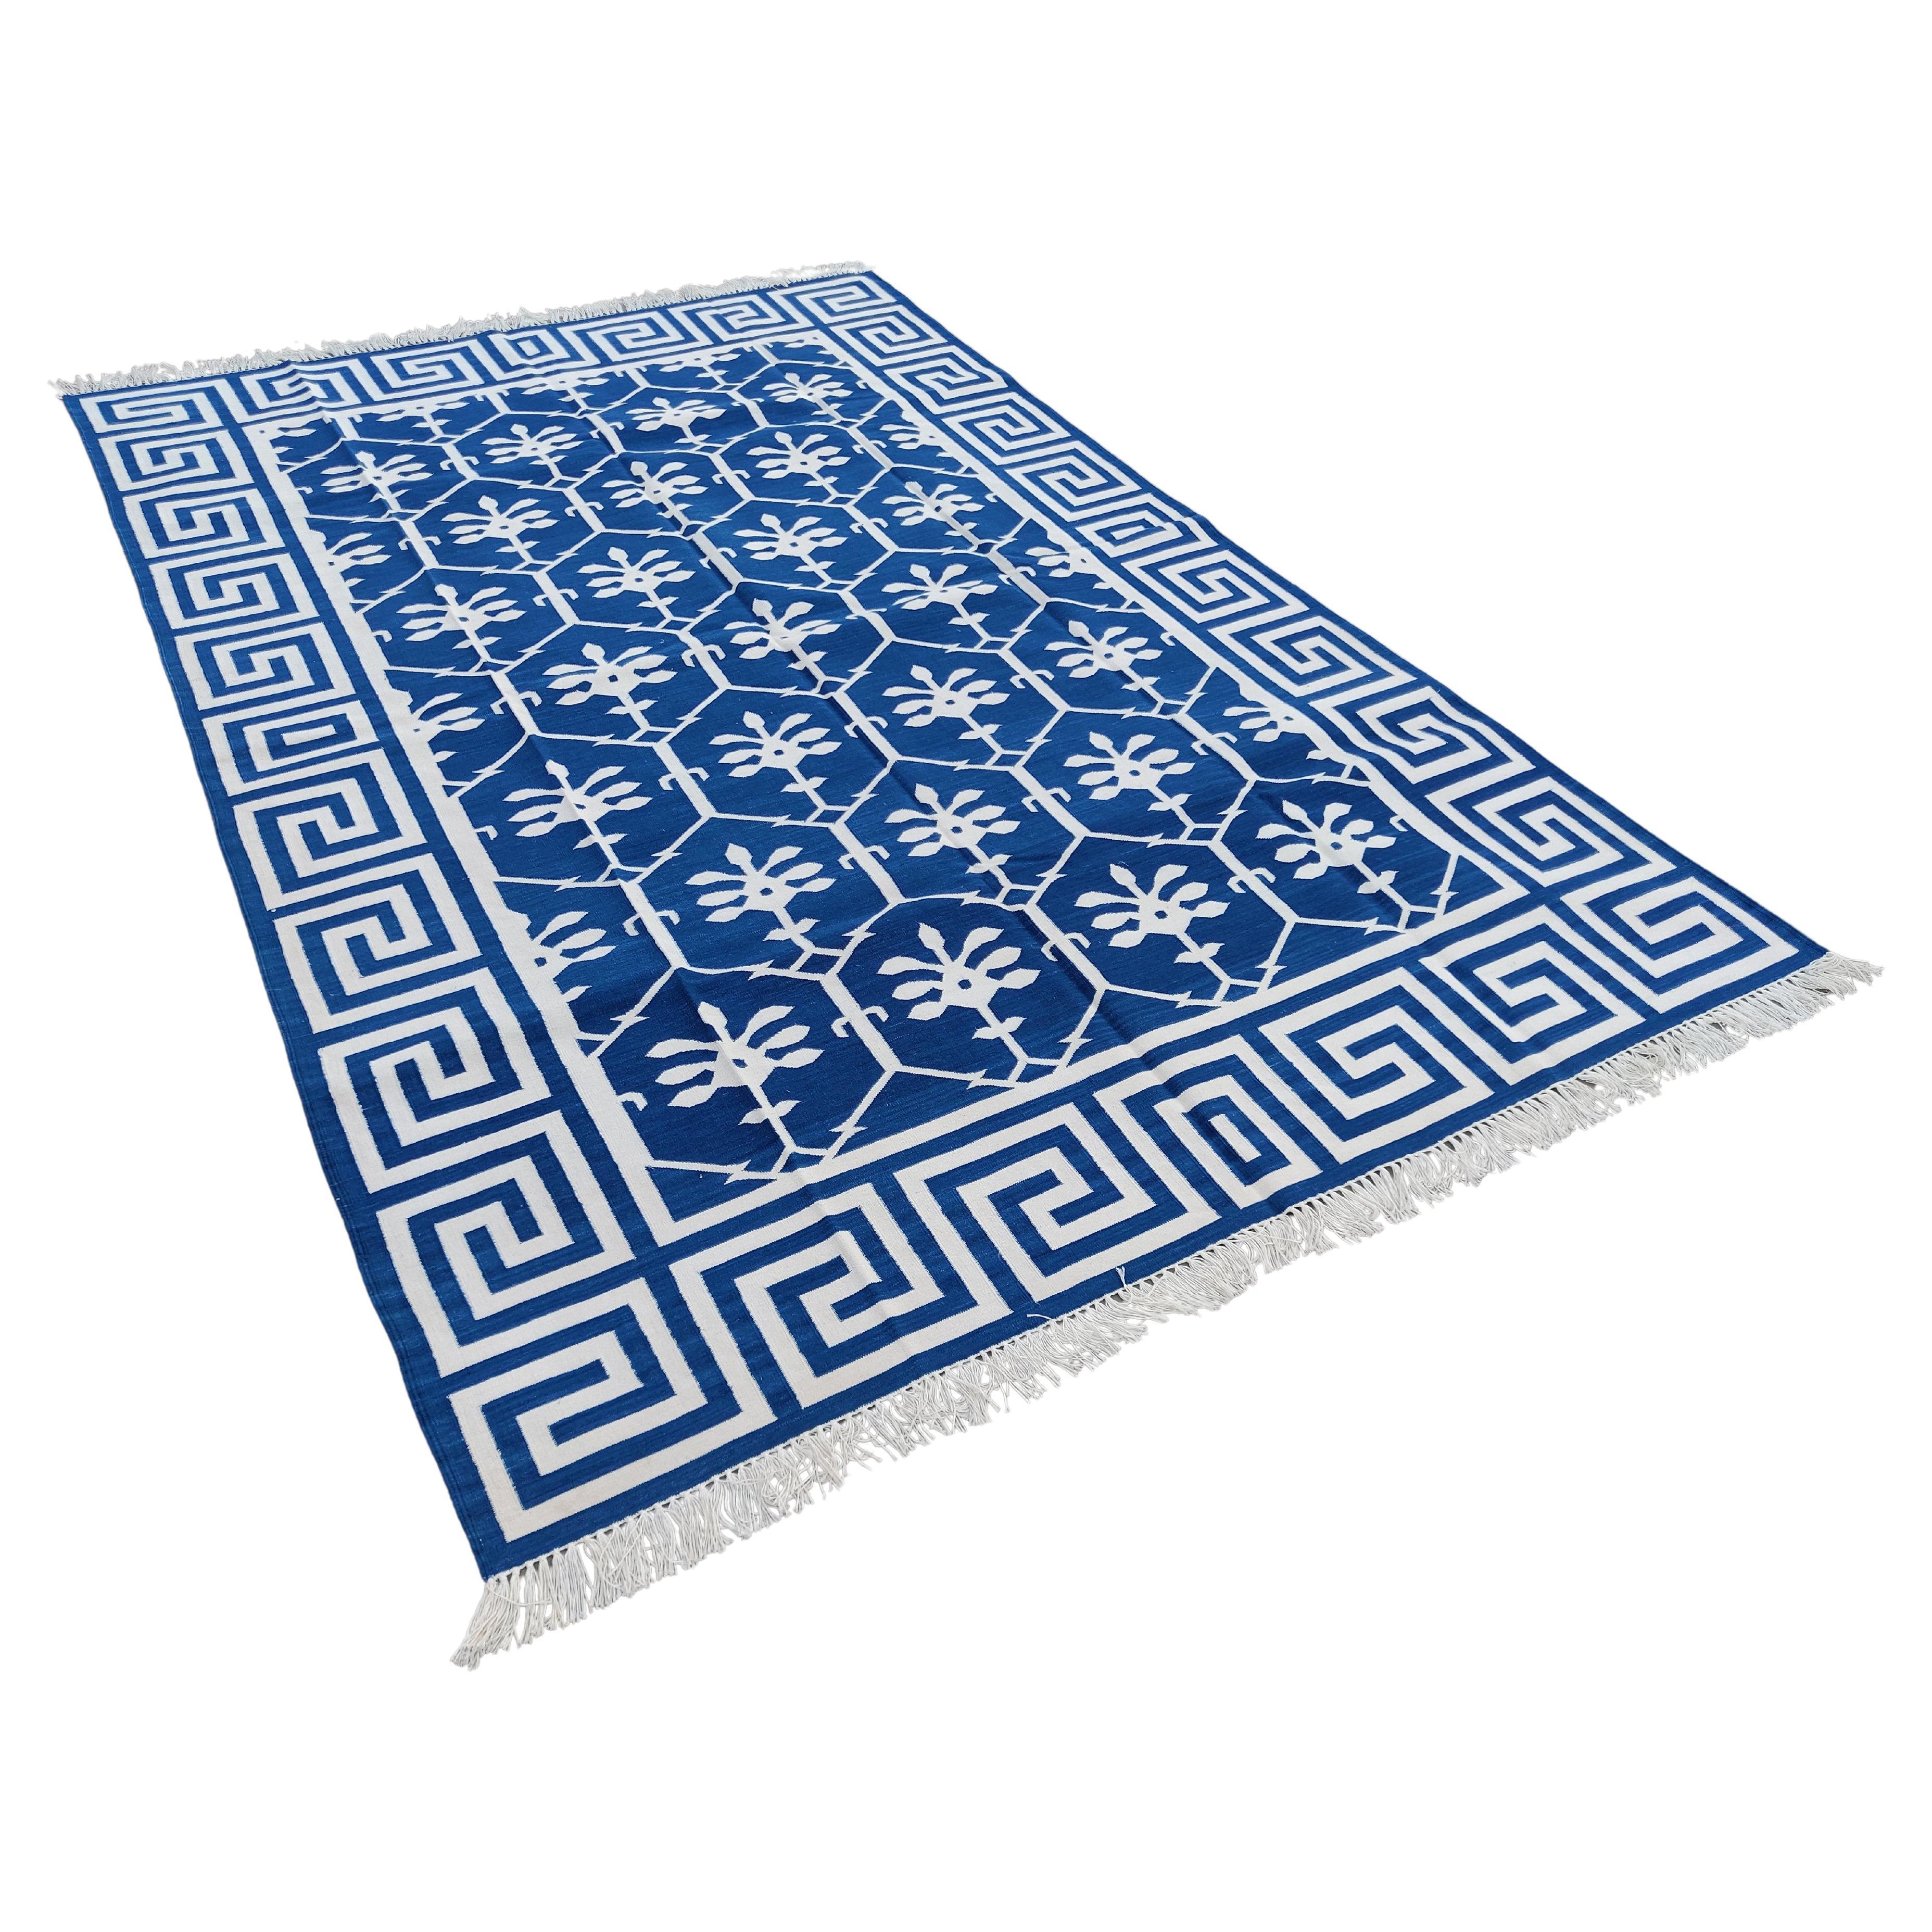 Handmade Cotton Area Flat Weave Rug, Blue And White Flower Indian Dhurrie-6x9 For Sale